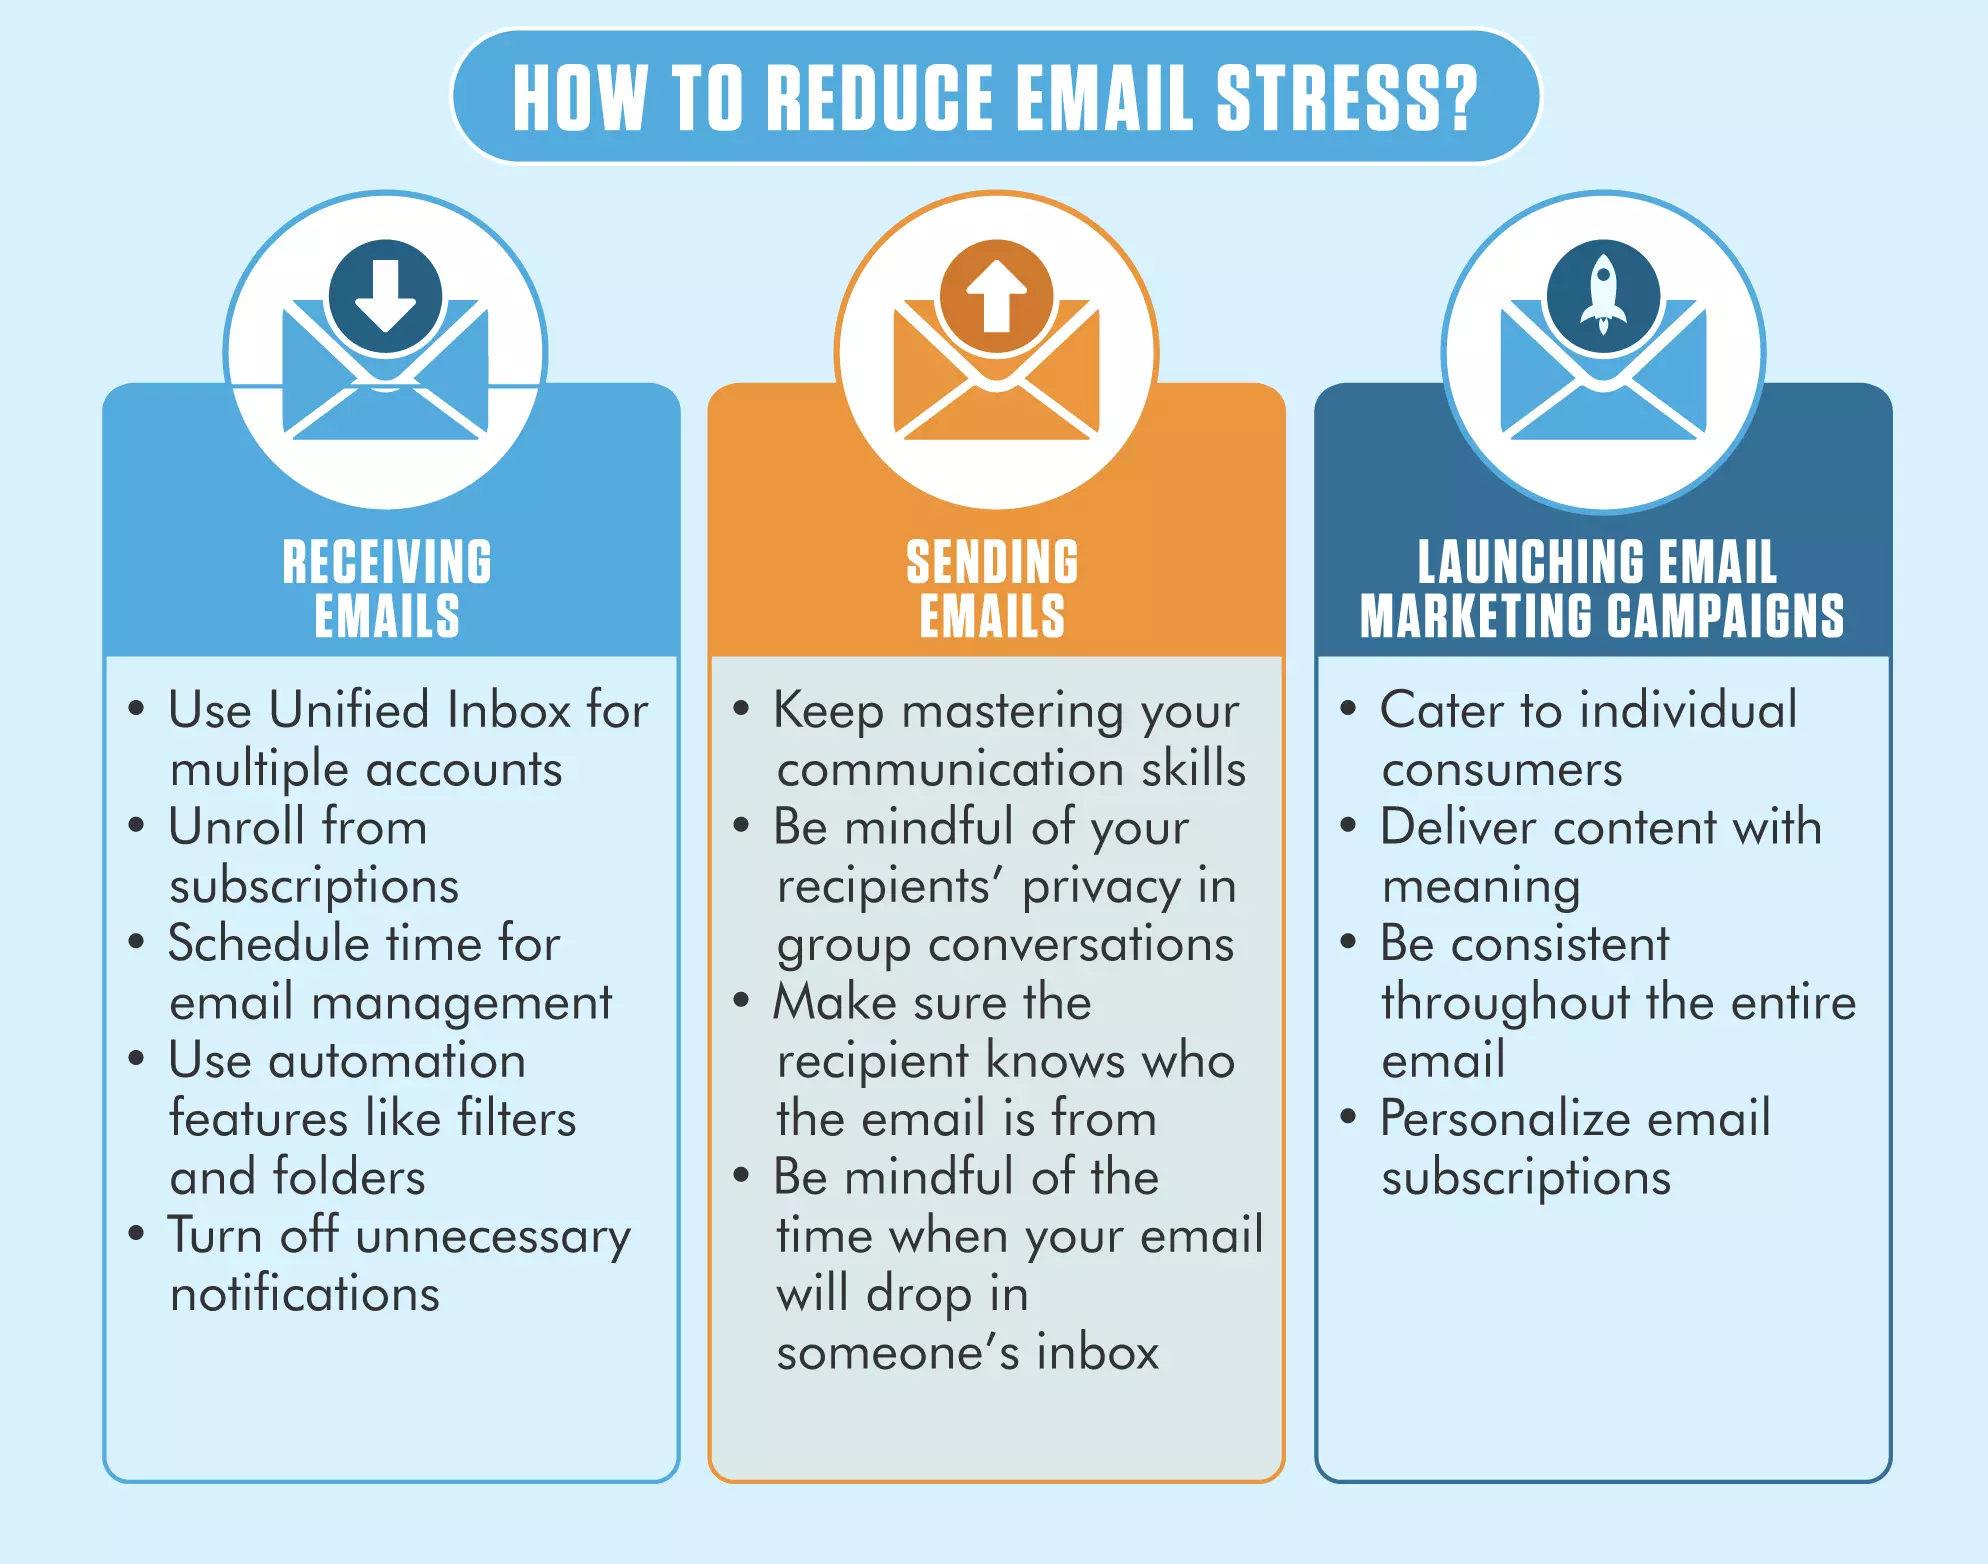 How to reduce email stress